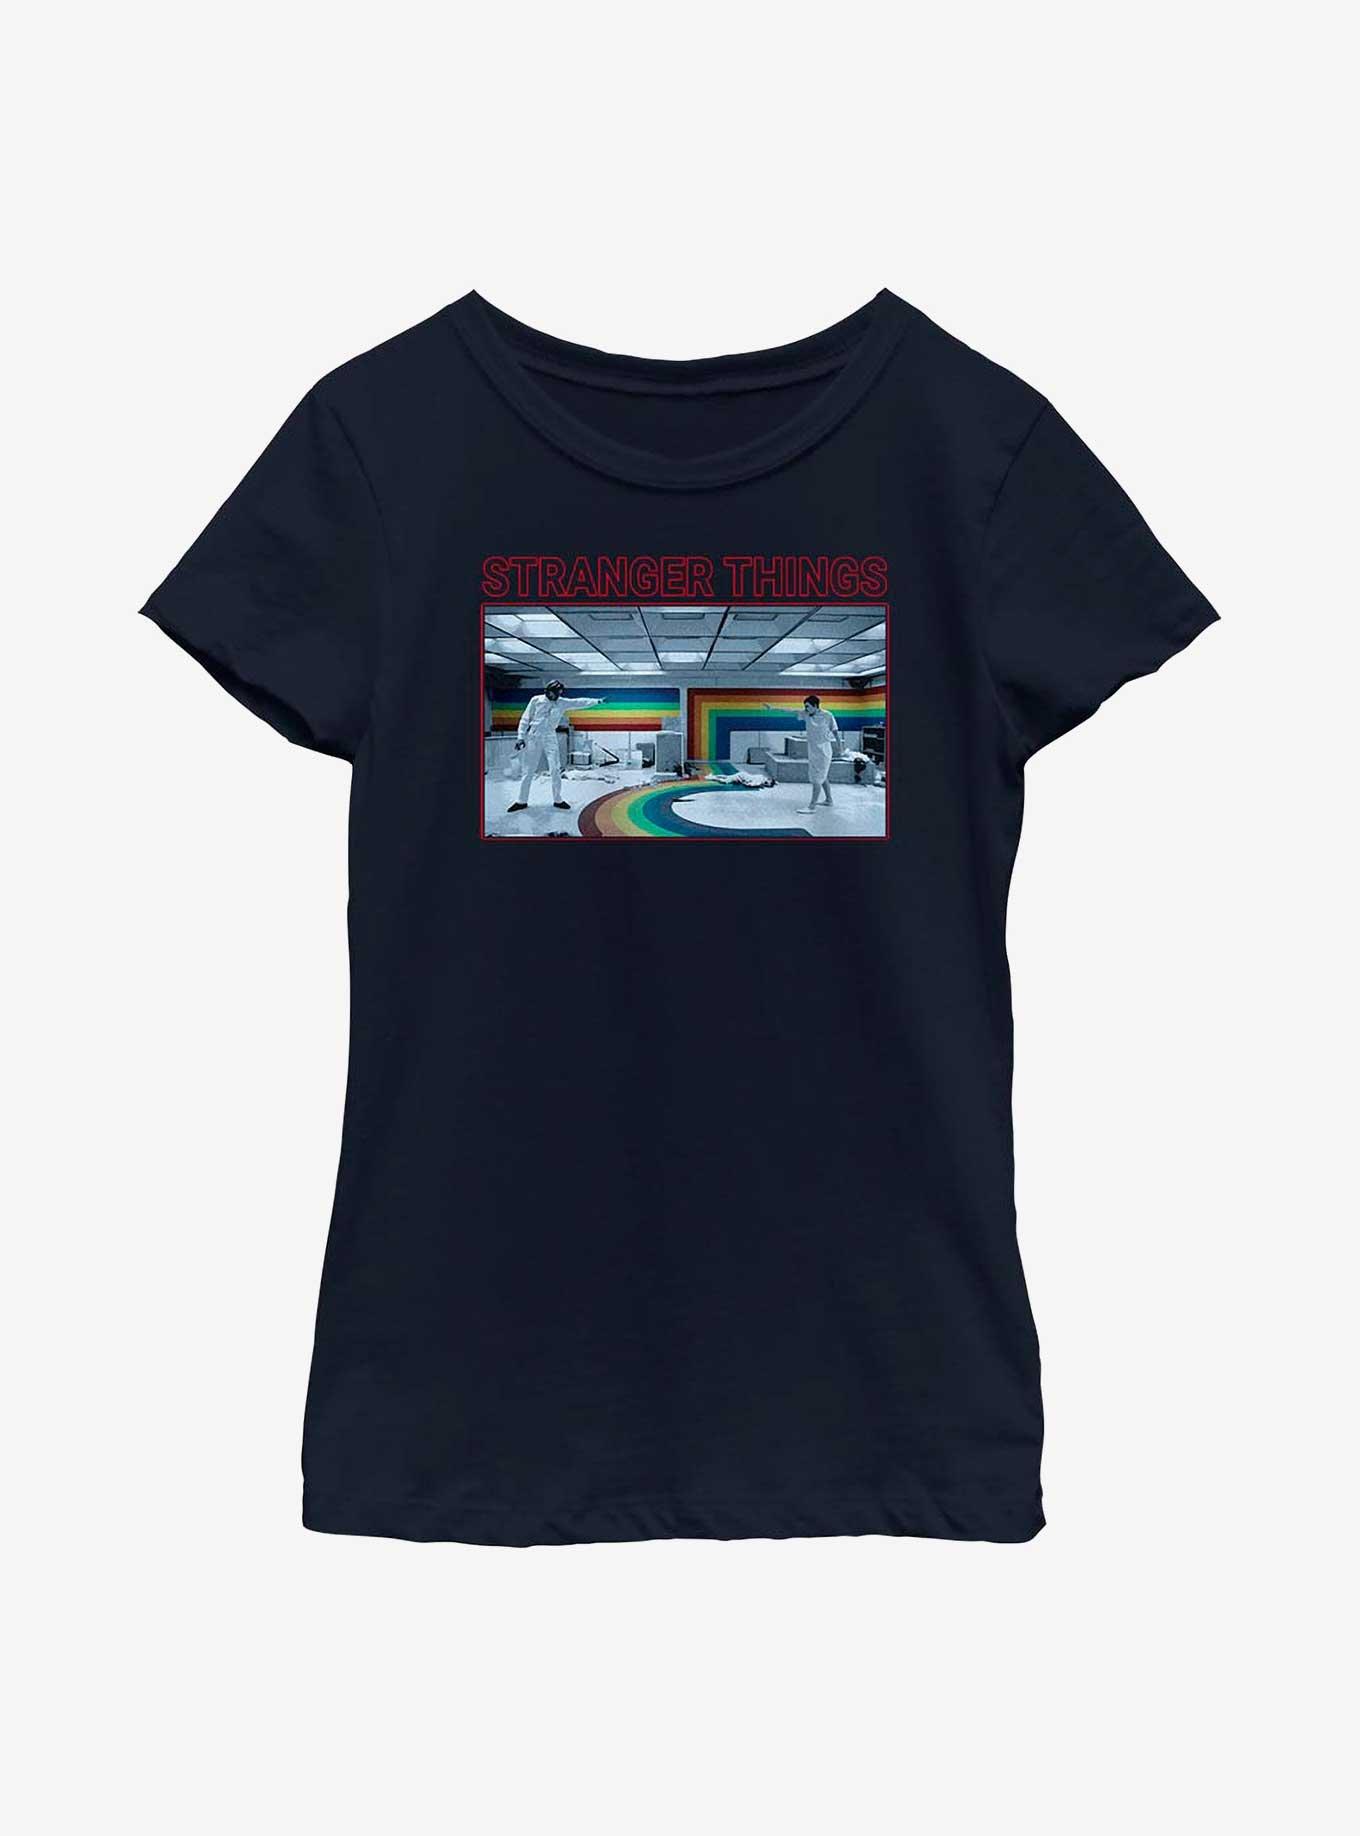 Stranger Things Rainbow Room Fight Youth Girls T-Shirt, NAVY, hi-res